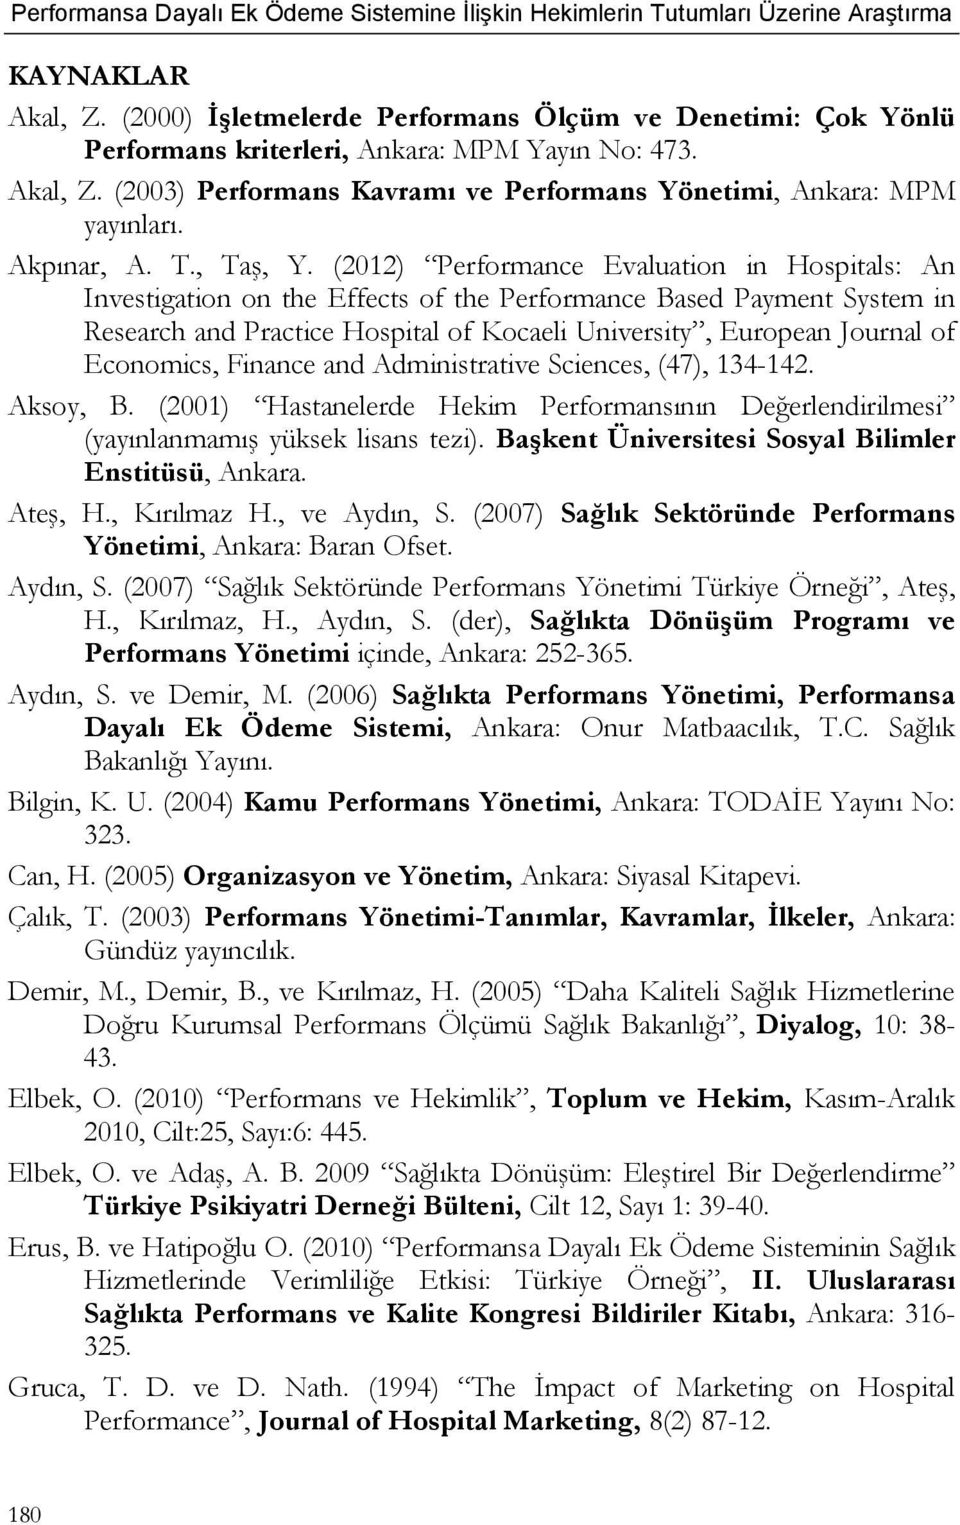 (2012) Performance Evaluation in Hospitals: An Investigation on the Effects of the Performance Based Payment System in Research and Practice Hospital of Kocaeli University, European Journal of